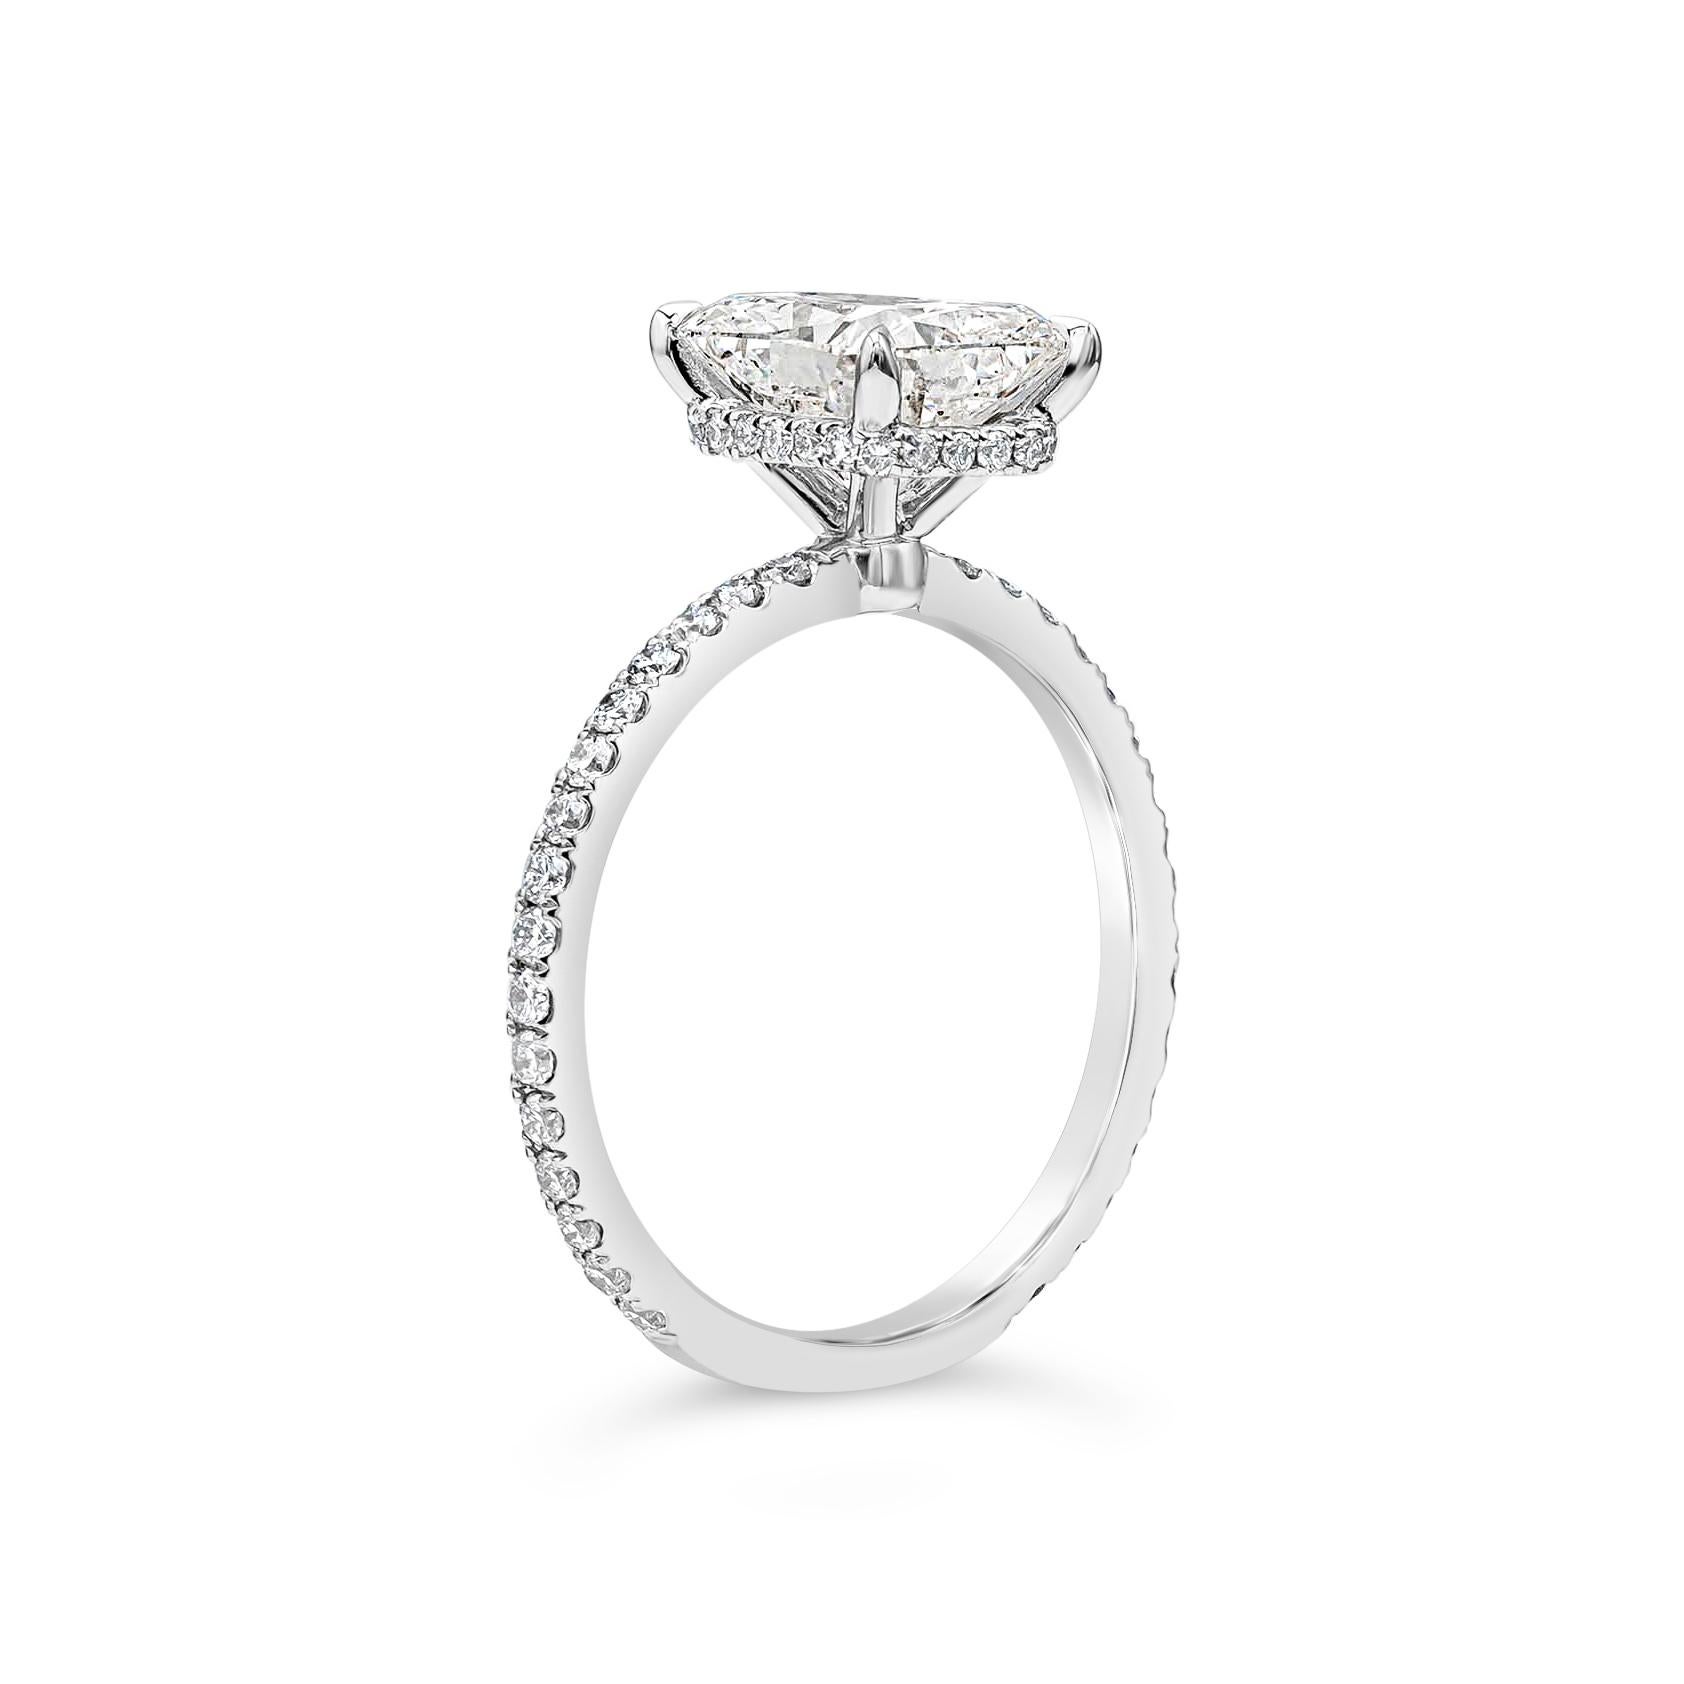 Contemporary GIA Certified 2.20 Carats Cushion Cut Diamond Engagement Ring with Side Stones